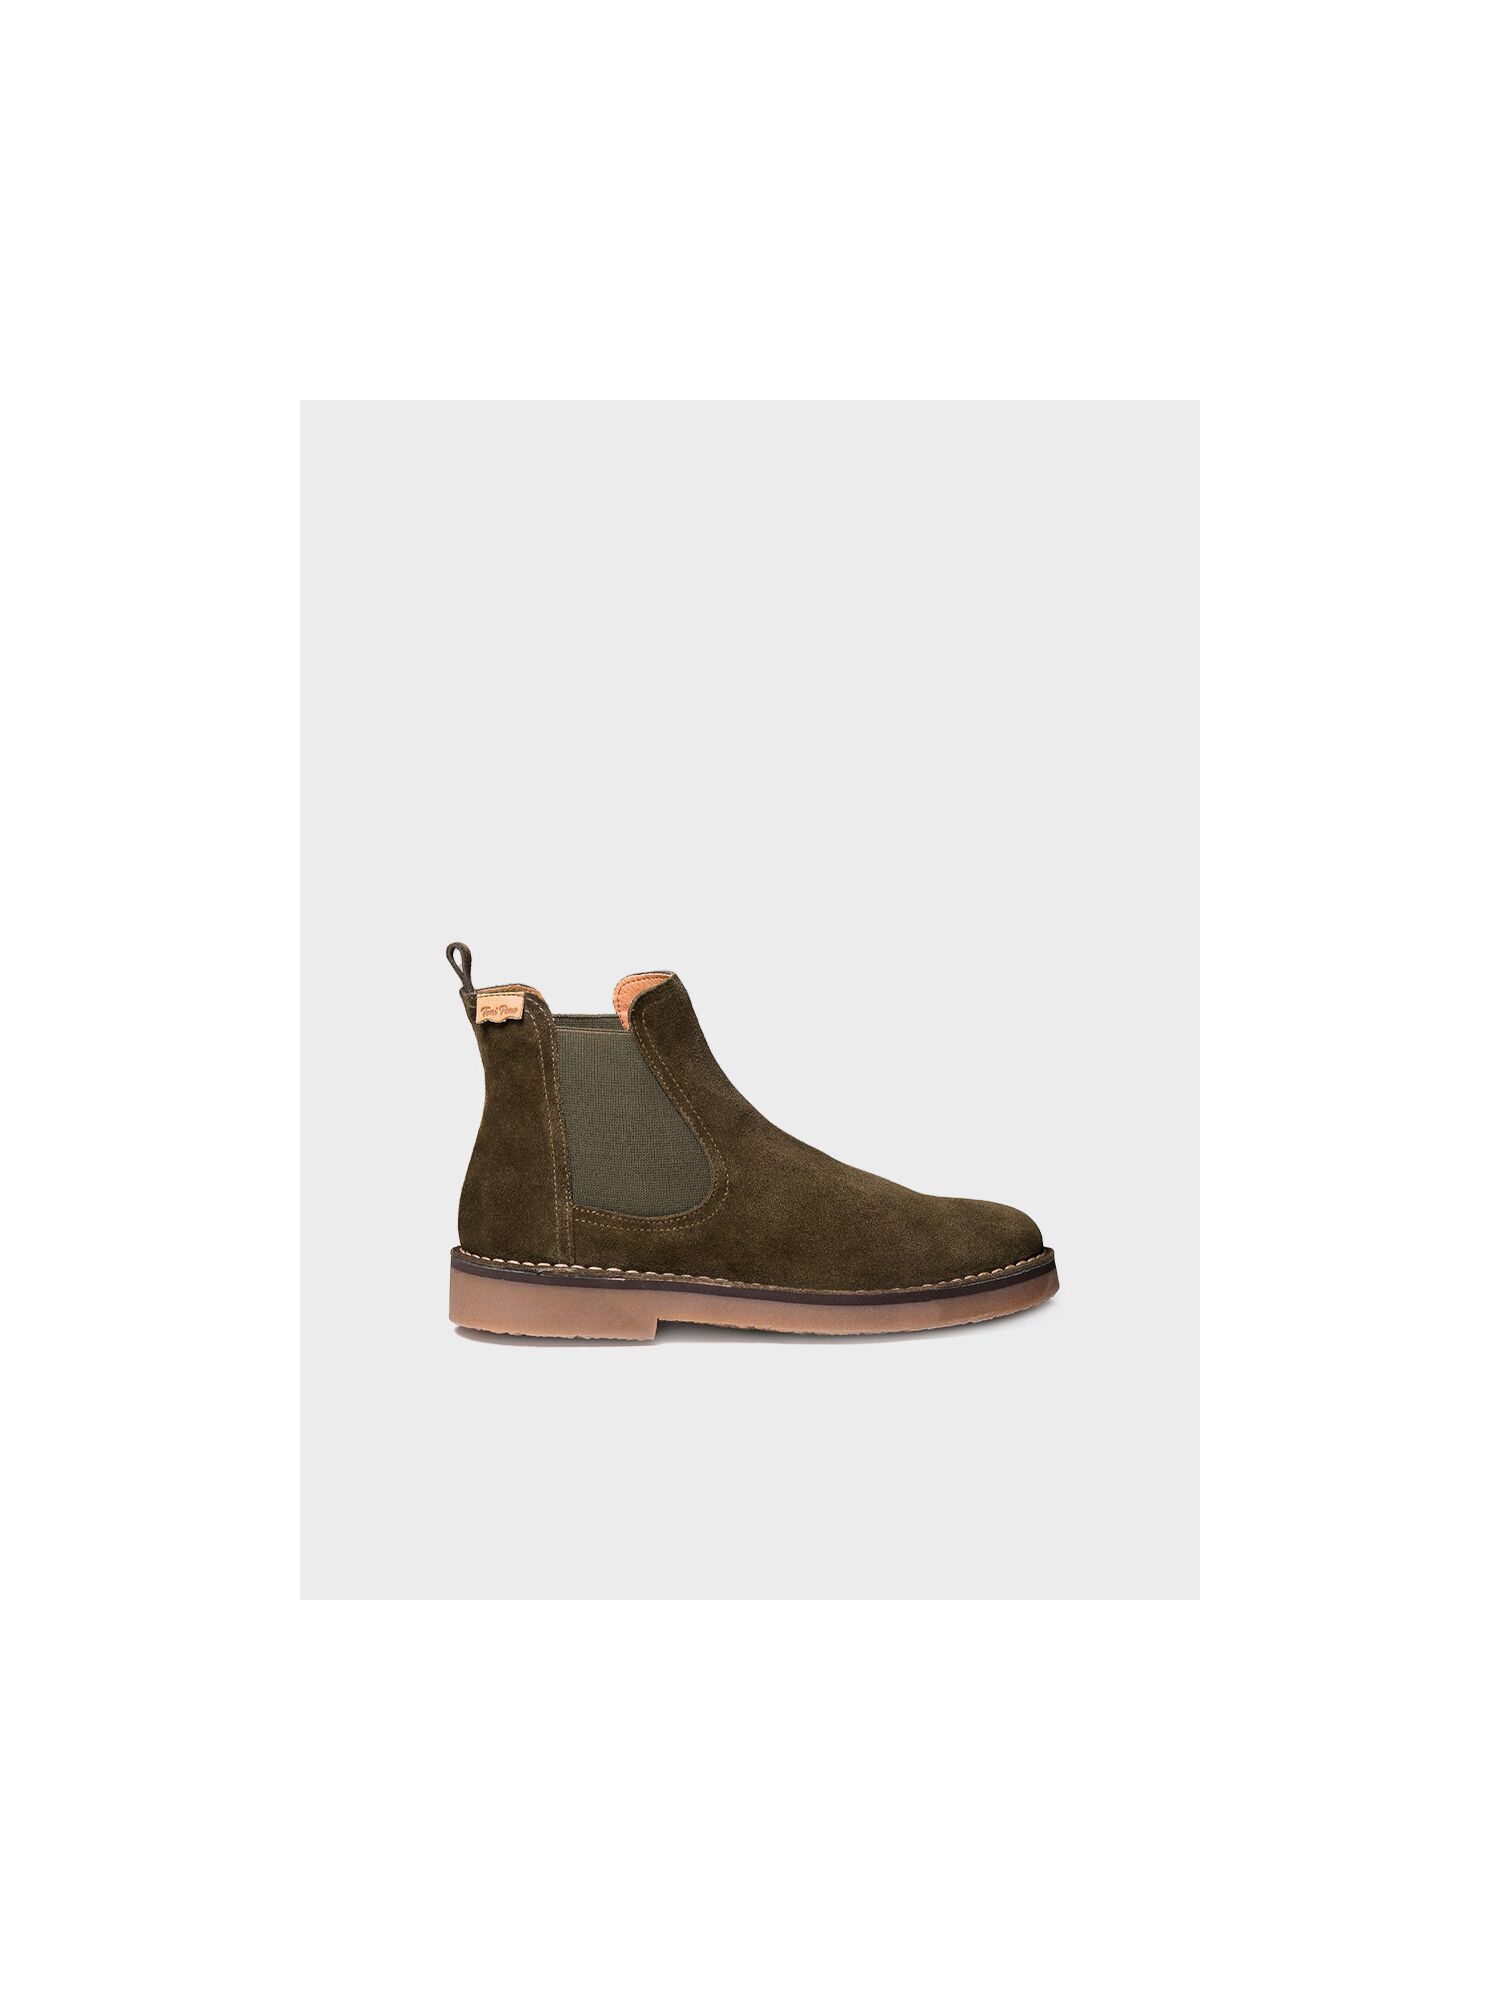 Women's Ankle boot in Suede in Khaki - ISA-SY